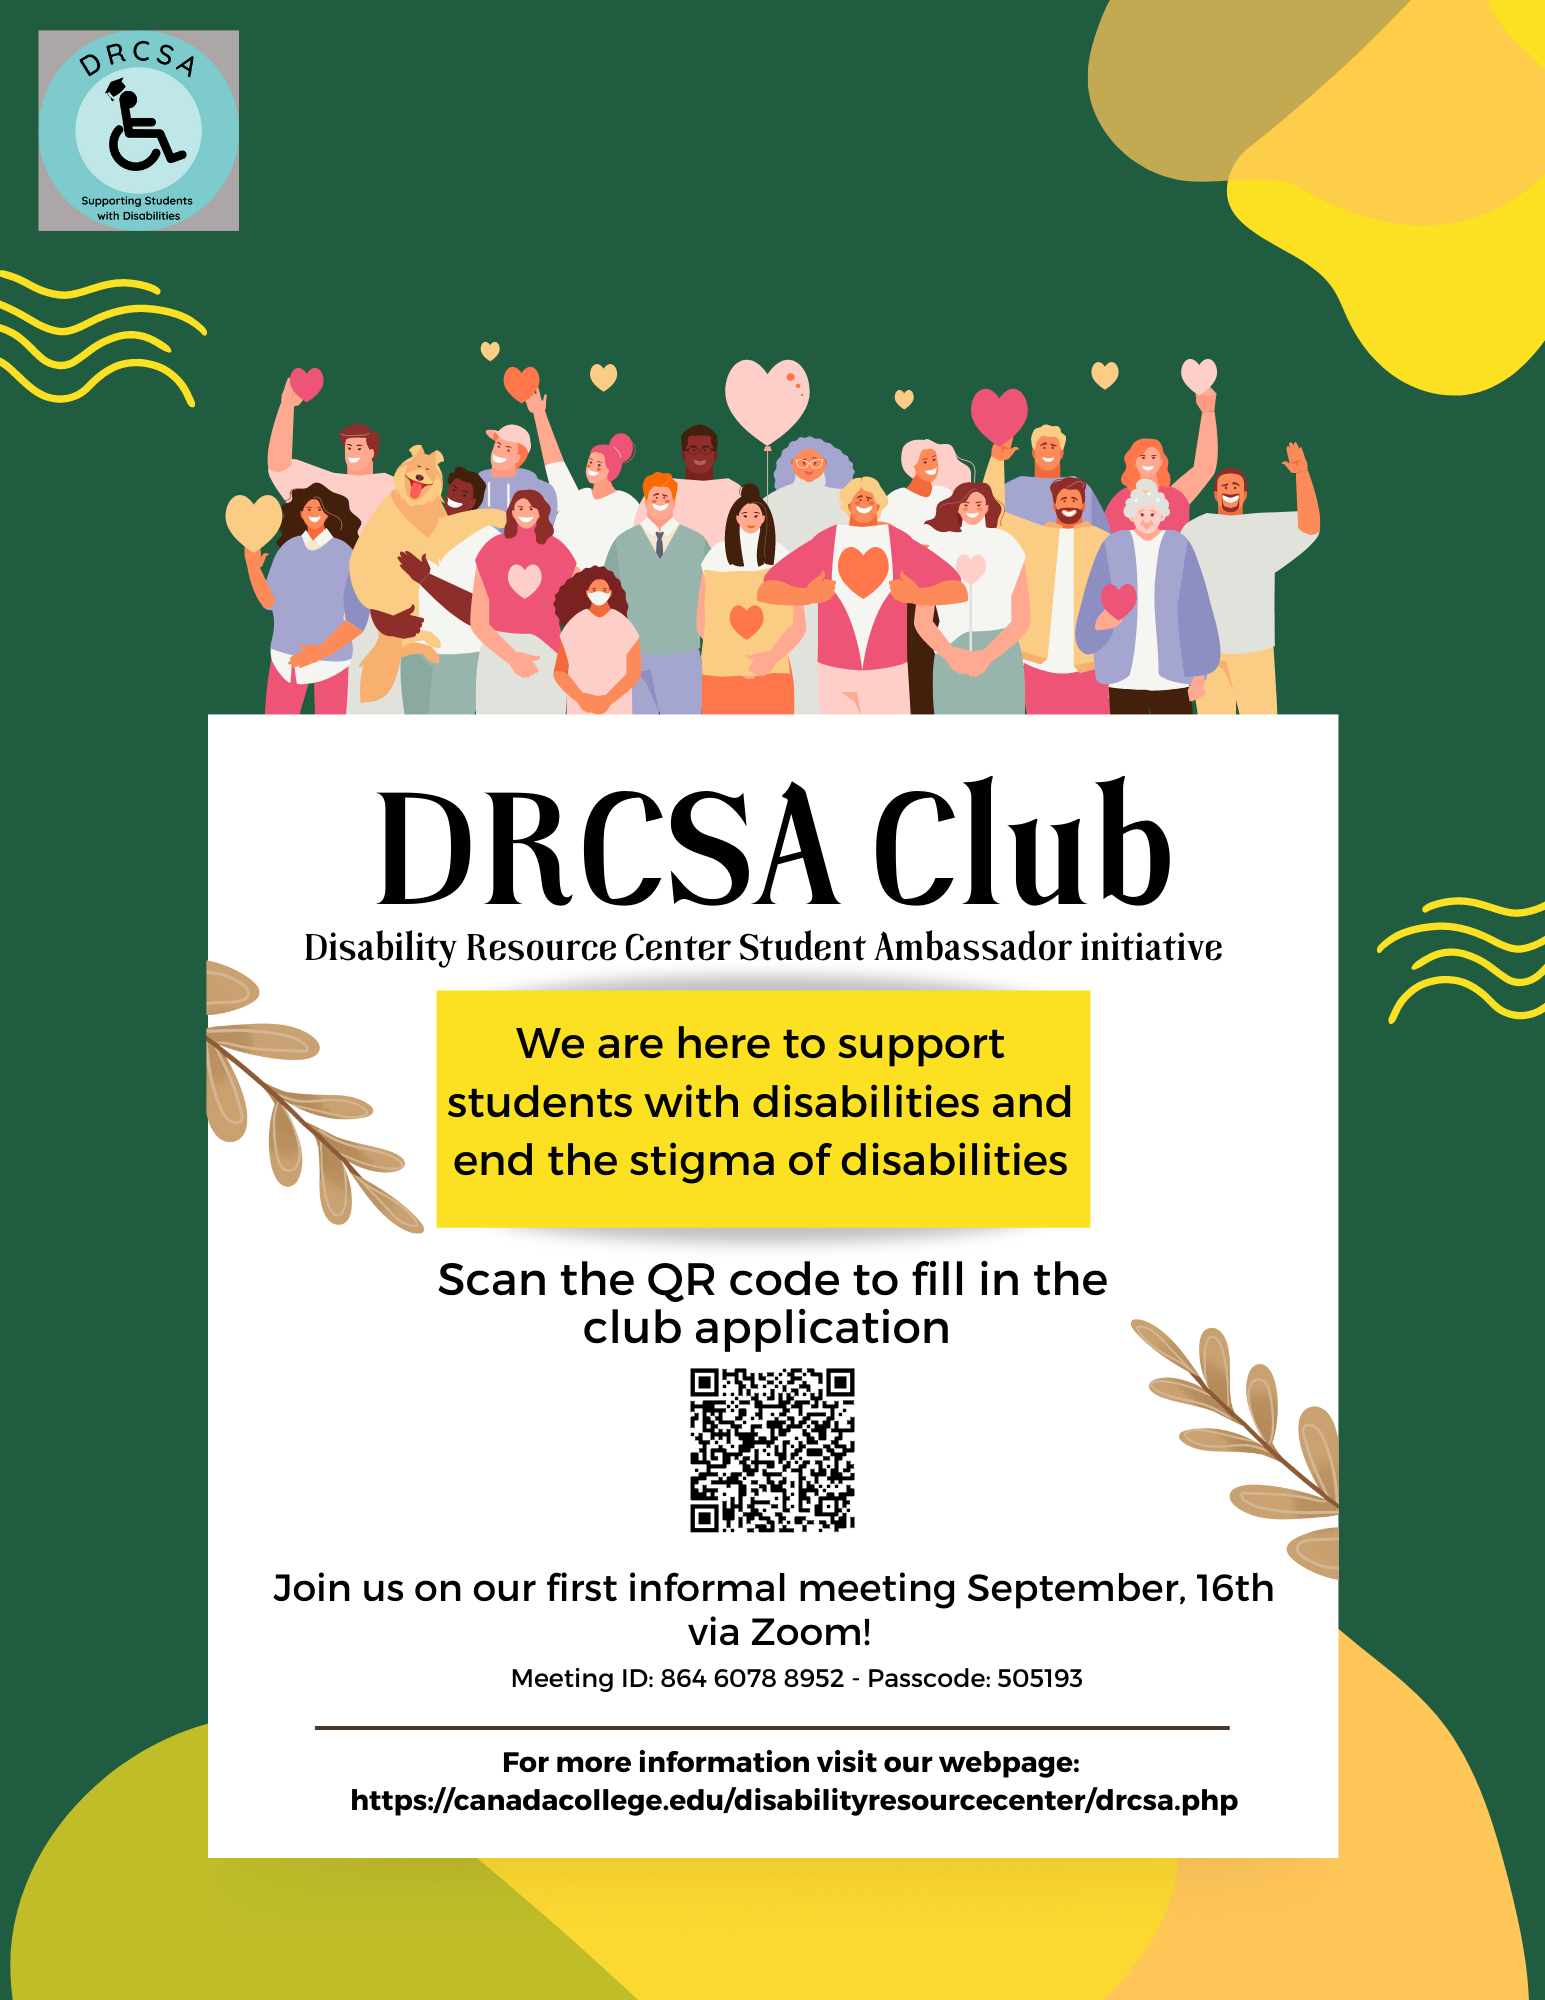 DRCSA club flyer - Join us on our first informal meeting September 16th, 2022  via Zoom.